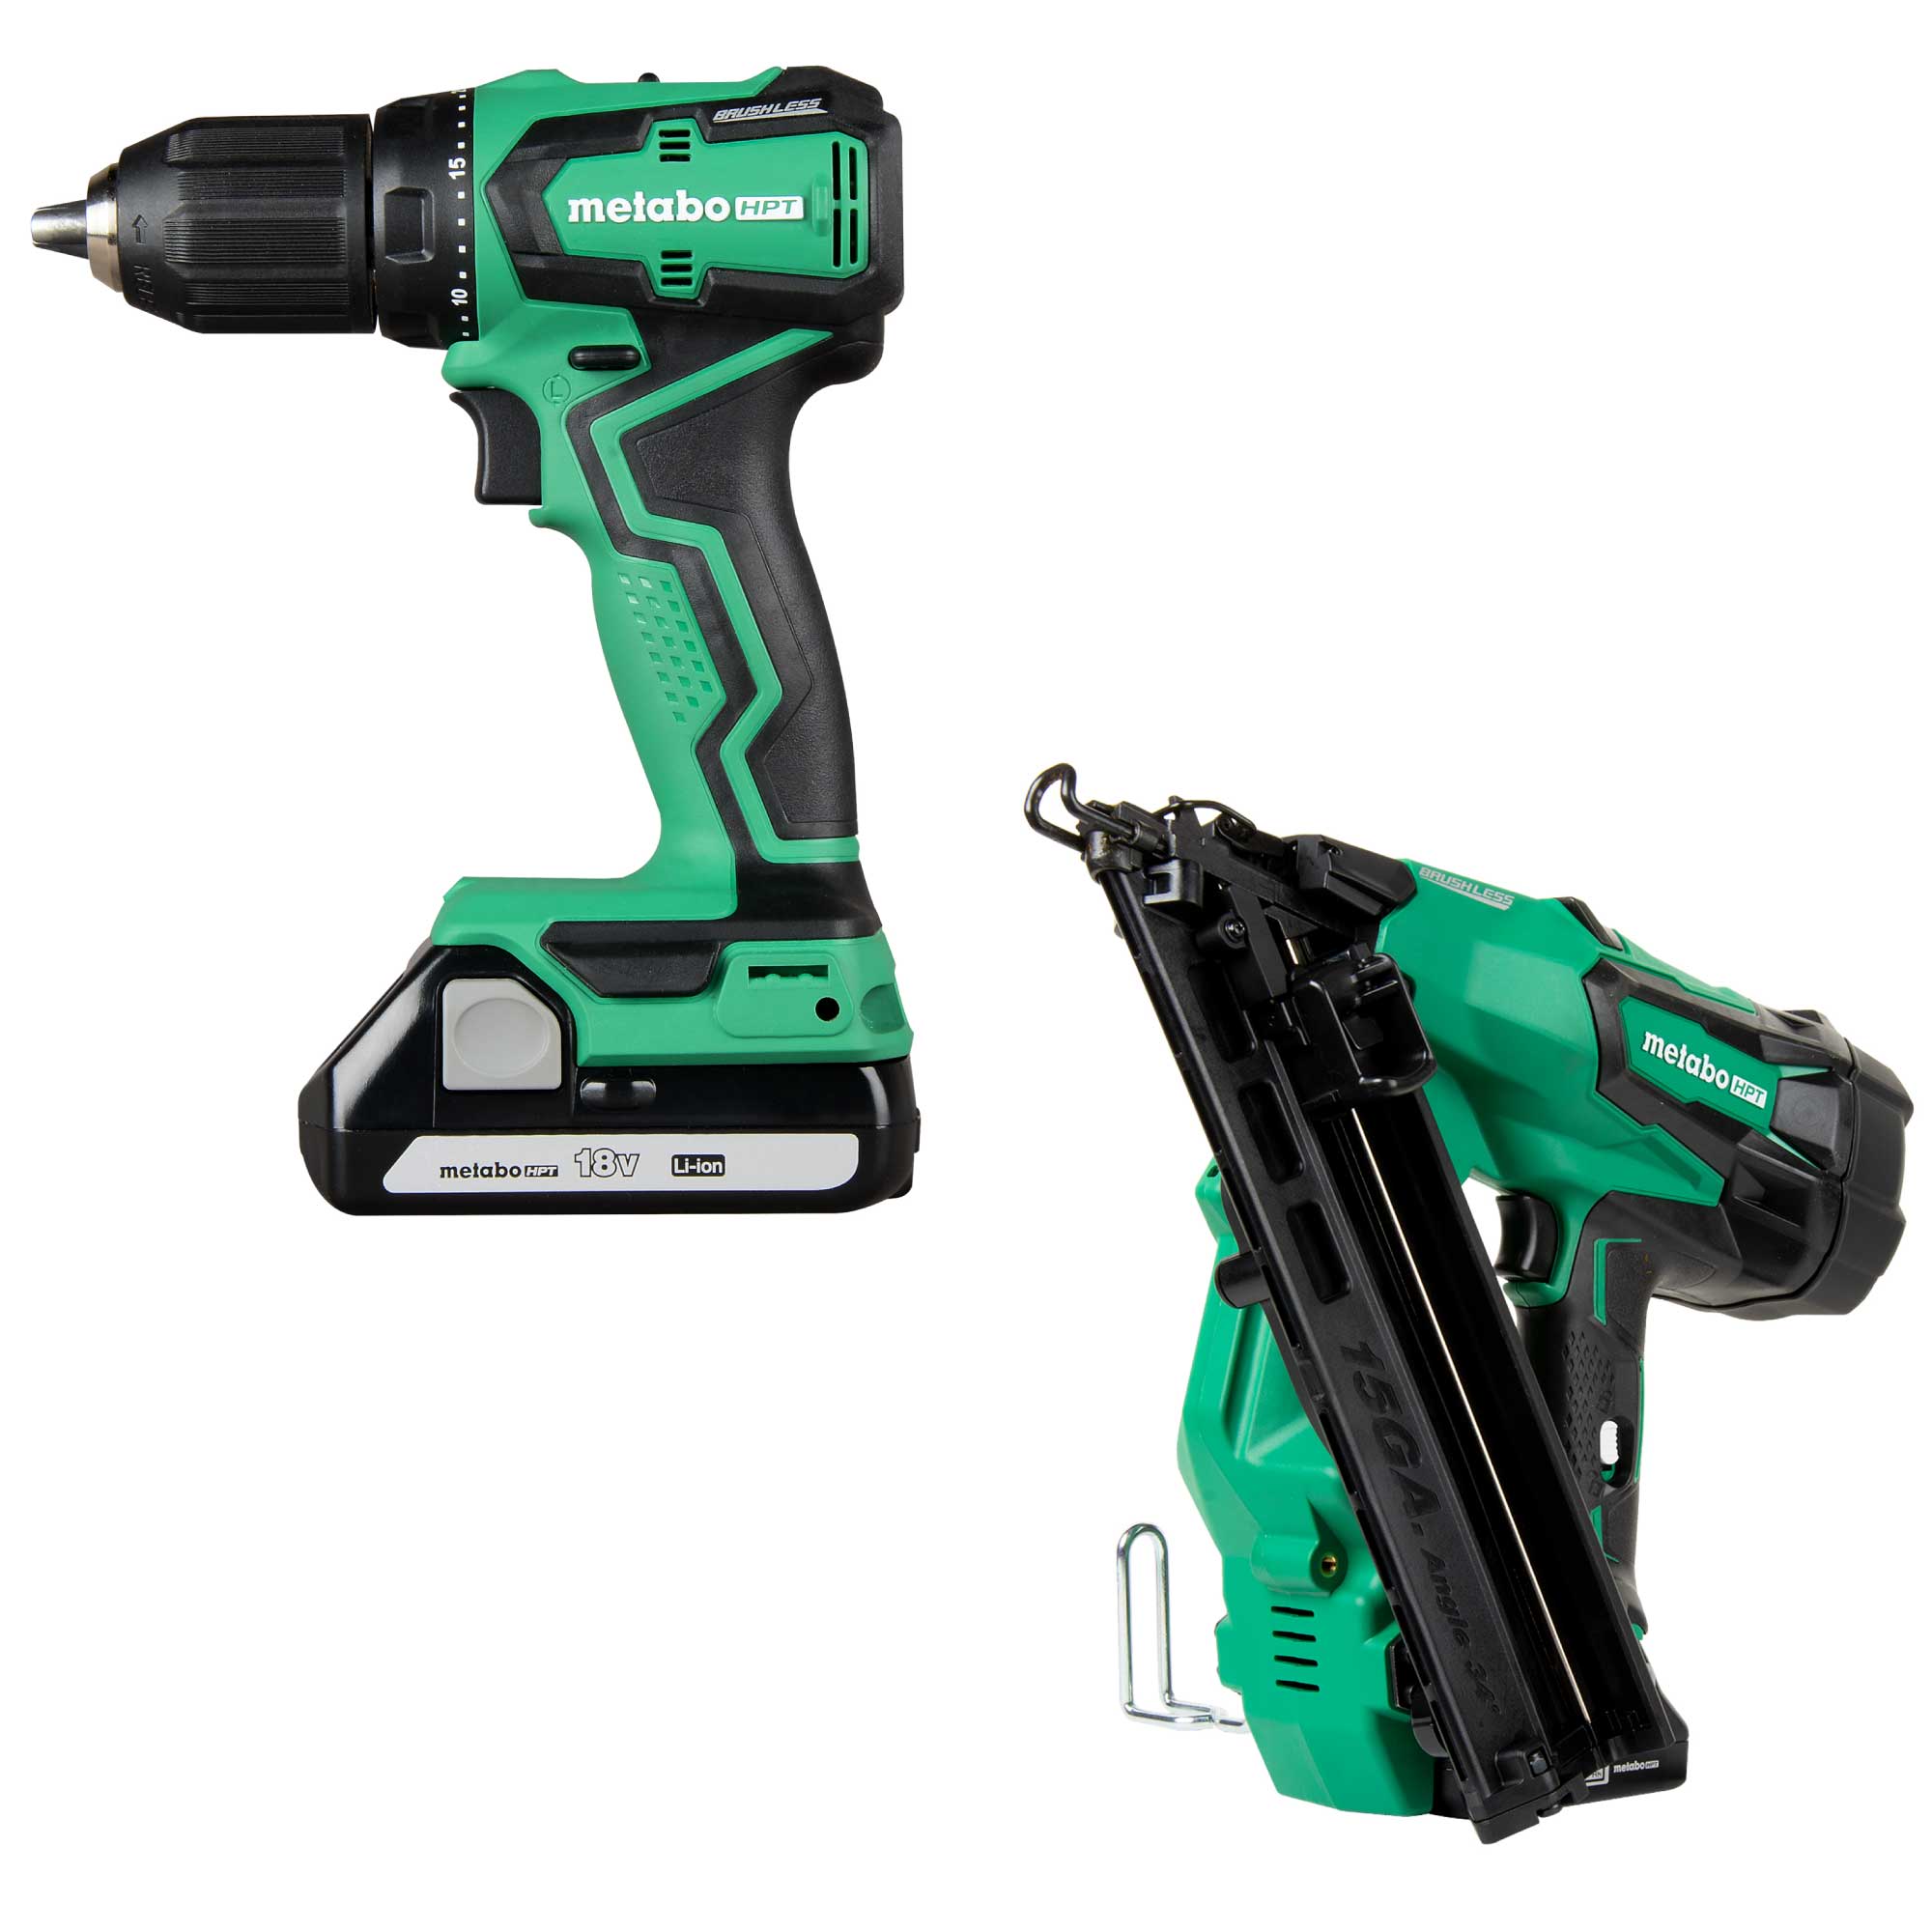 Metabo HPT MultiVolt 18-volt 1/2-in Keyless Brushless Cordless Drill (2-batteries included and Charger included) with MultiVolt 18-Volt 15-Gauge